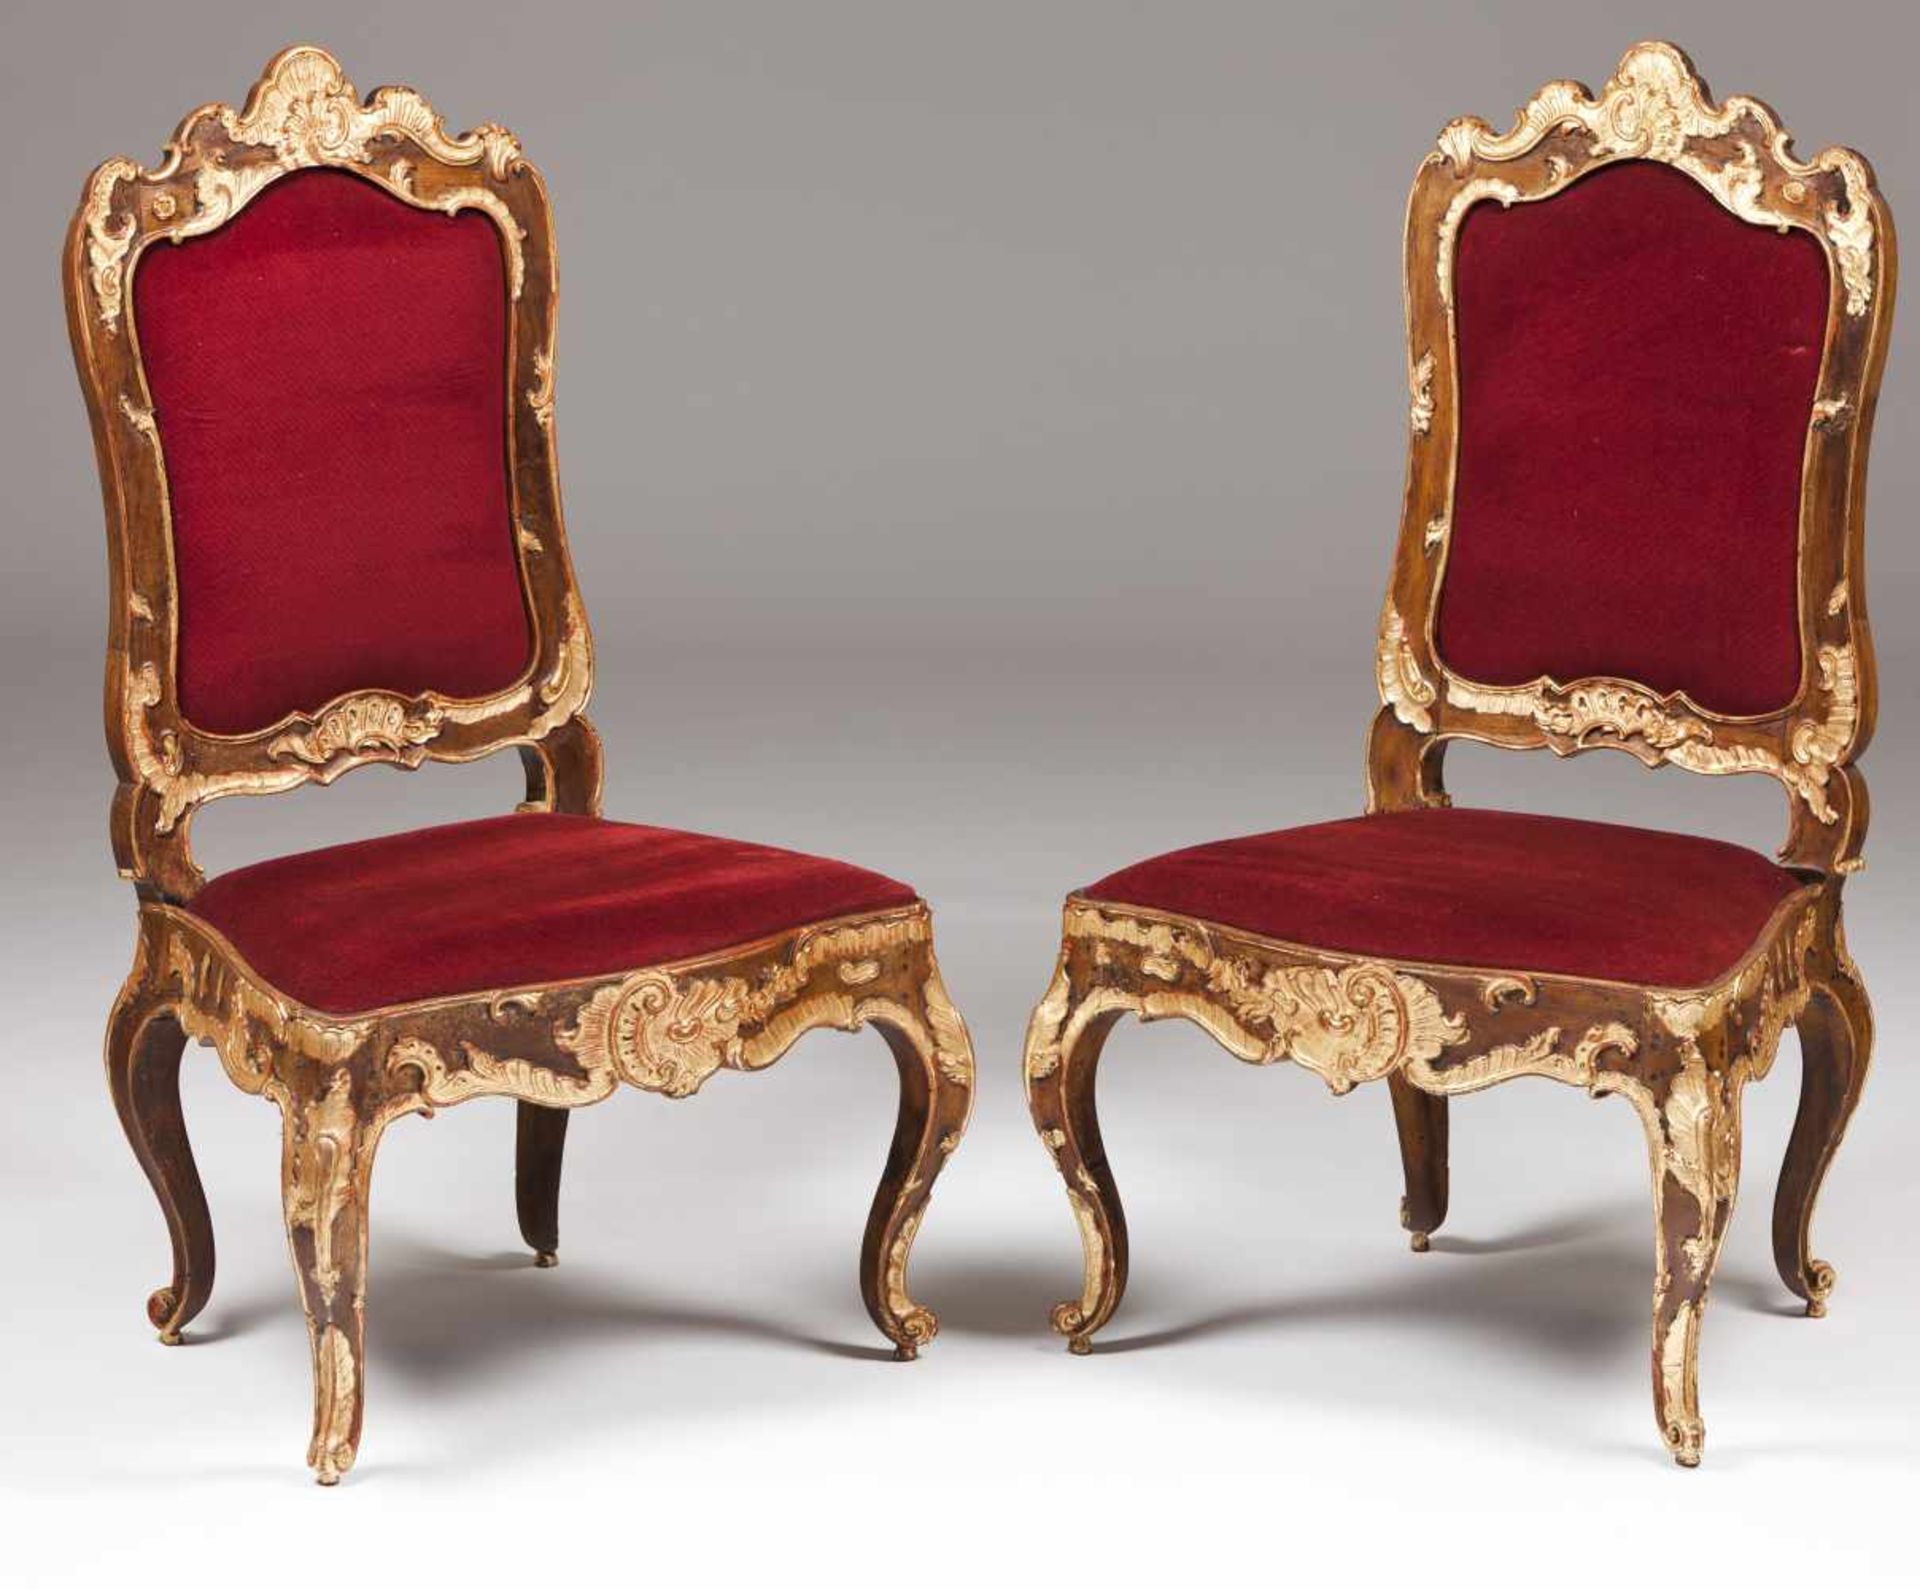 A pair of rocaille chairs